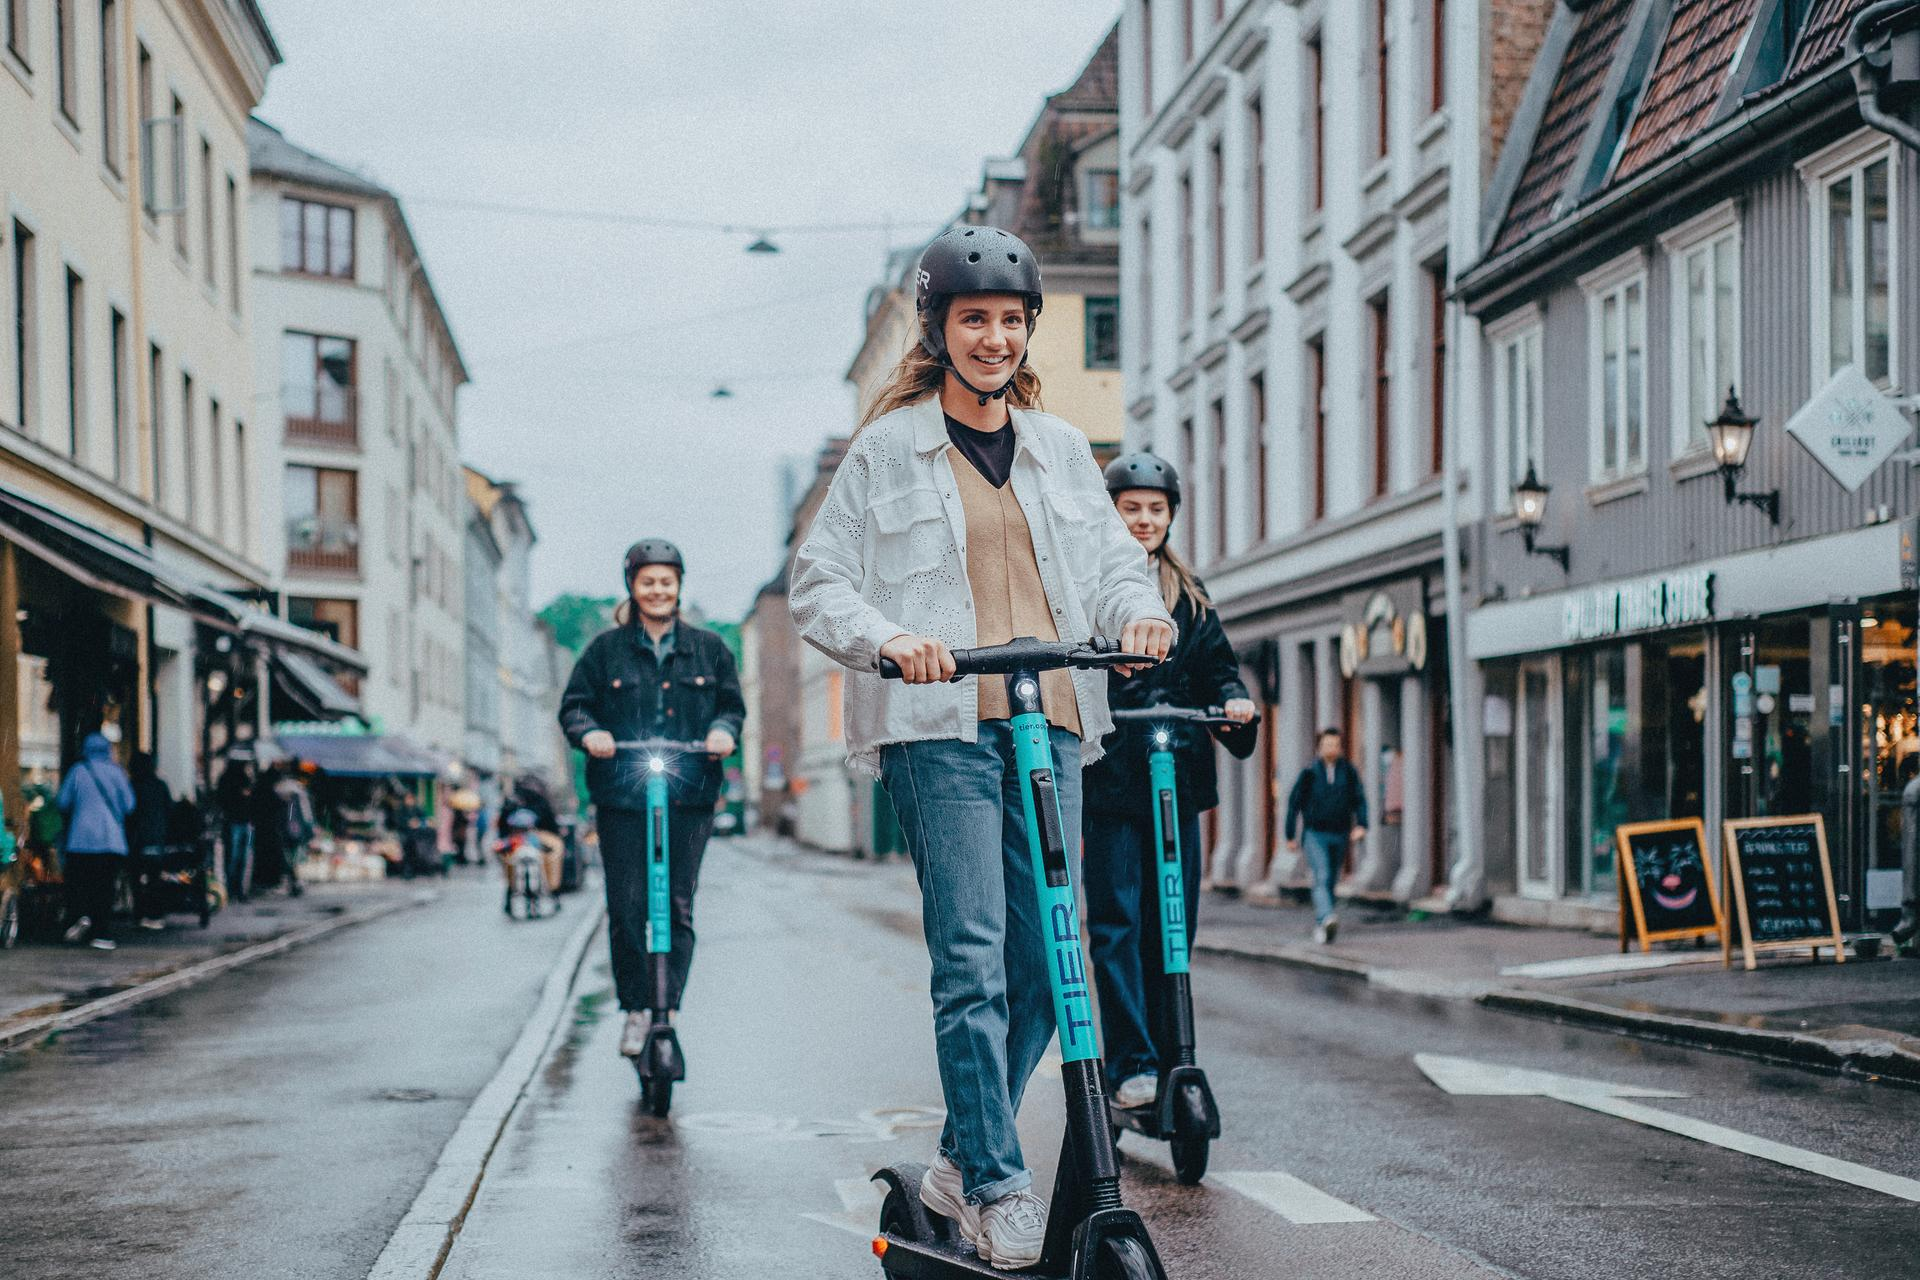 image of person riding a Tier e-scooter